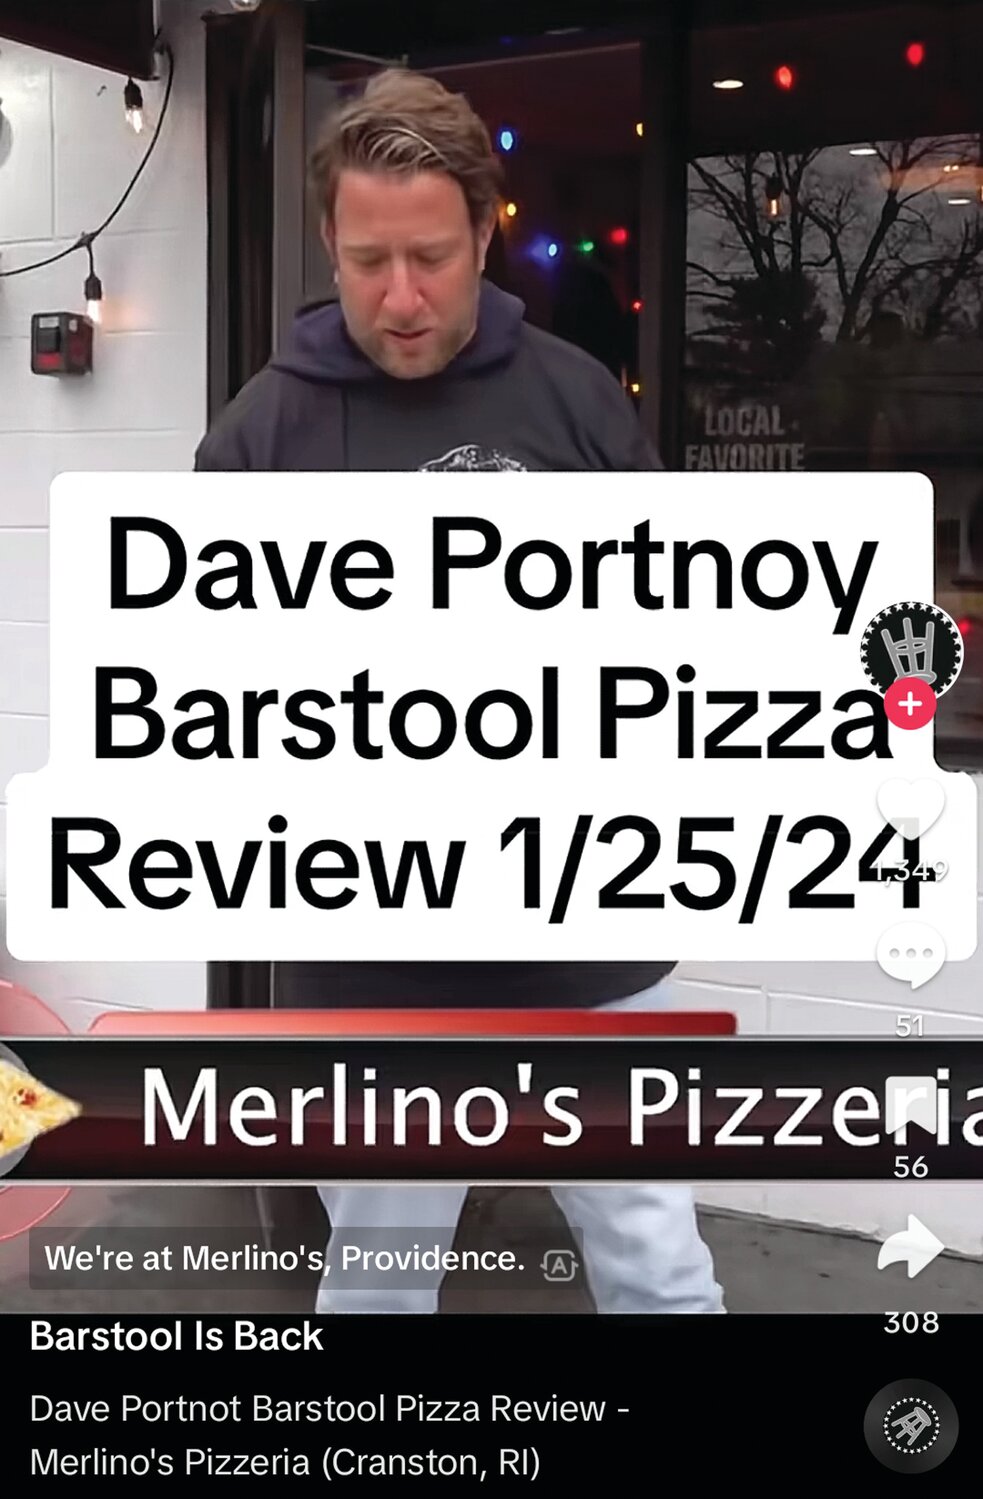 MERLINO’S REVIEW: Dave Portnoy also reviewed Merlino’s Pizzeria in Cranston on his Providence pizza crawl last week.